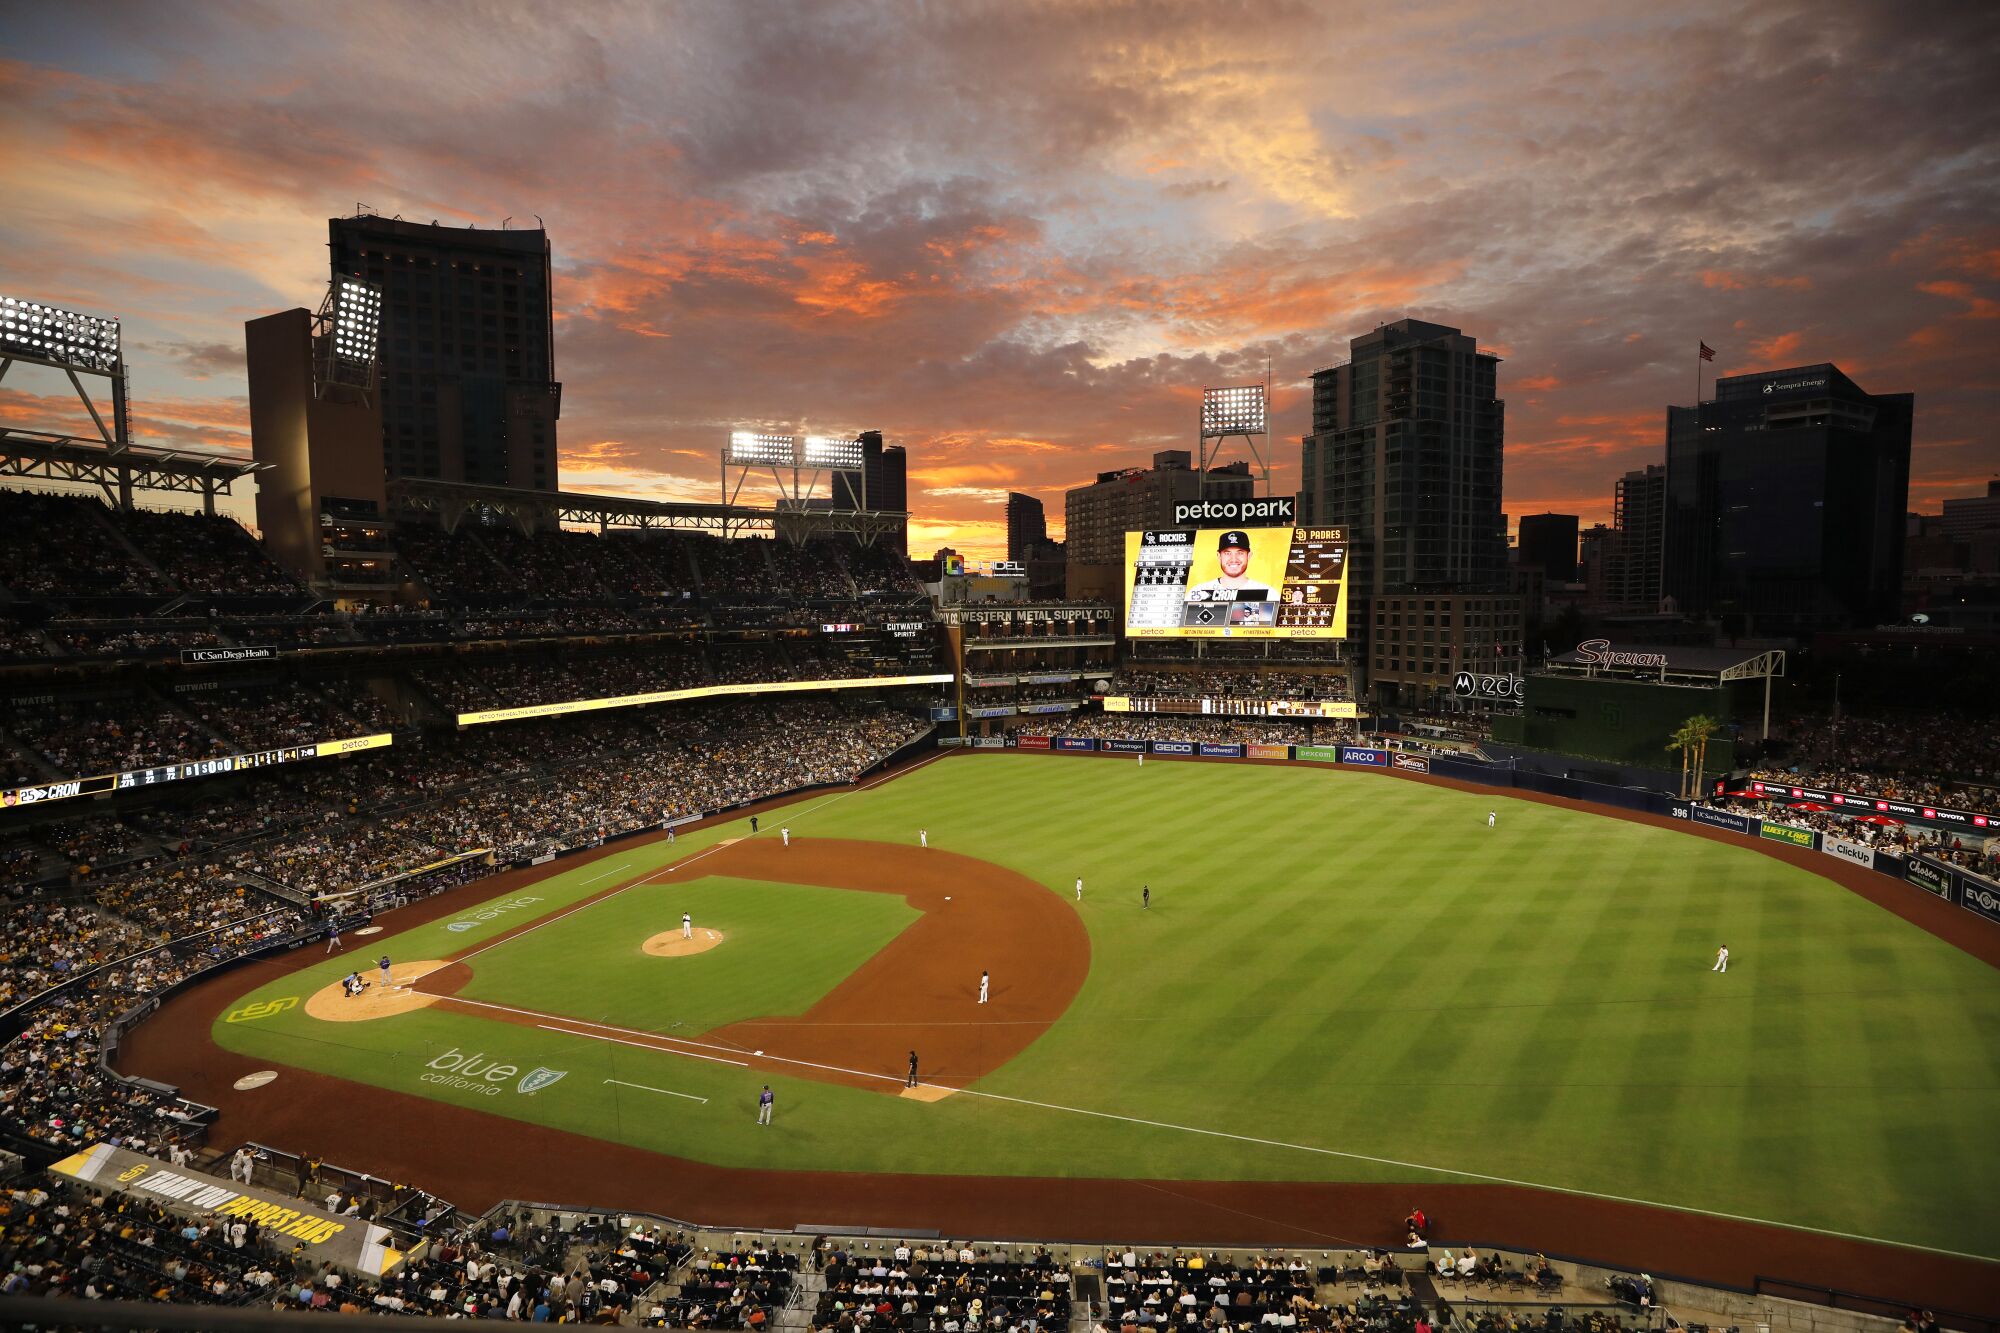 The sun sets as the San Diego Padres played the Colorado Rockies to one of the largest crowds ever